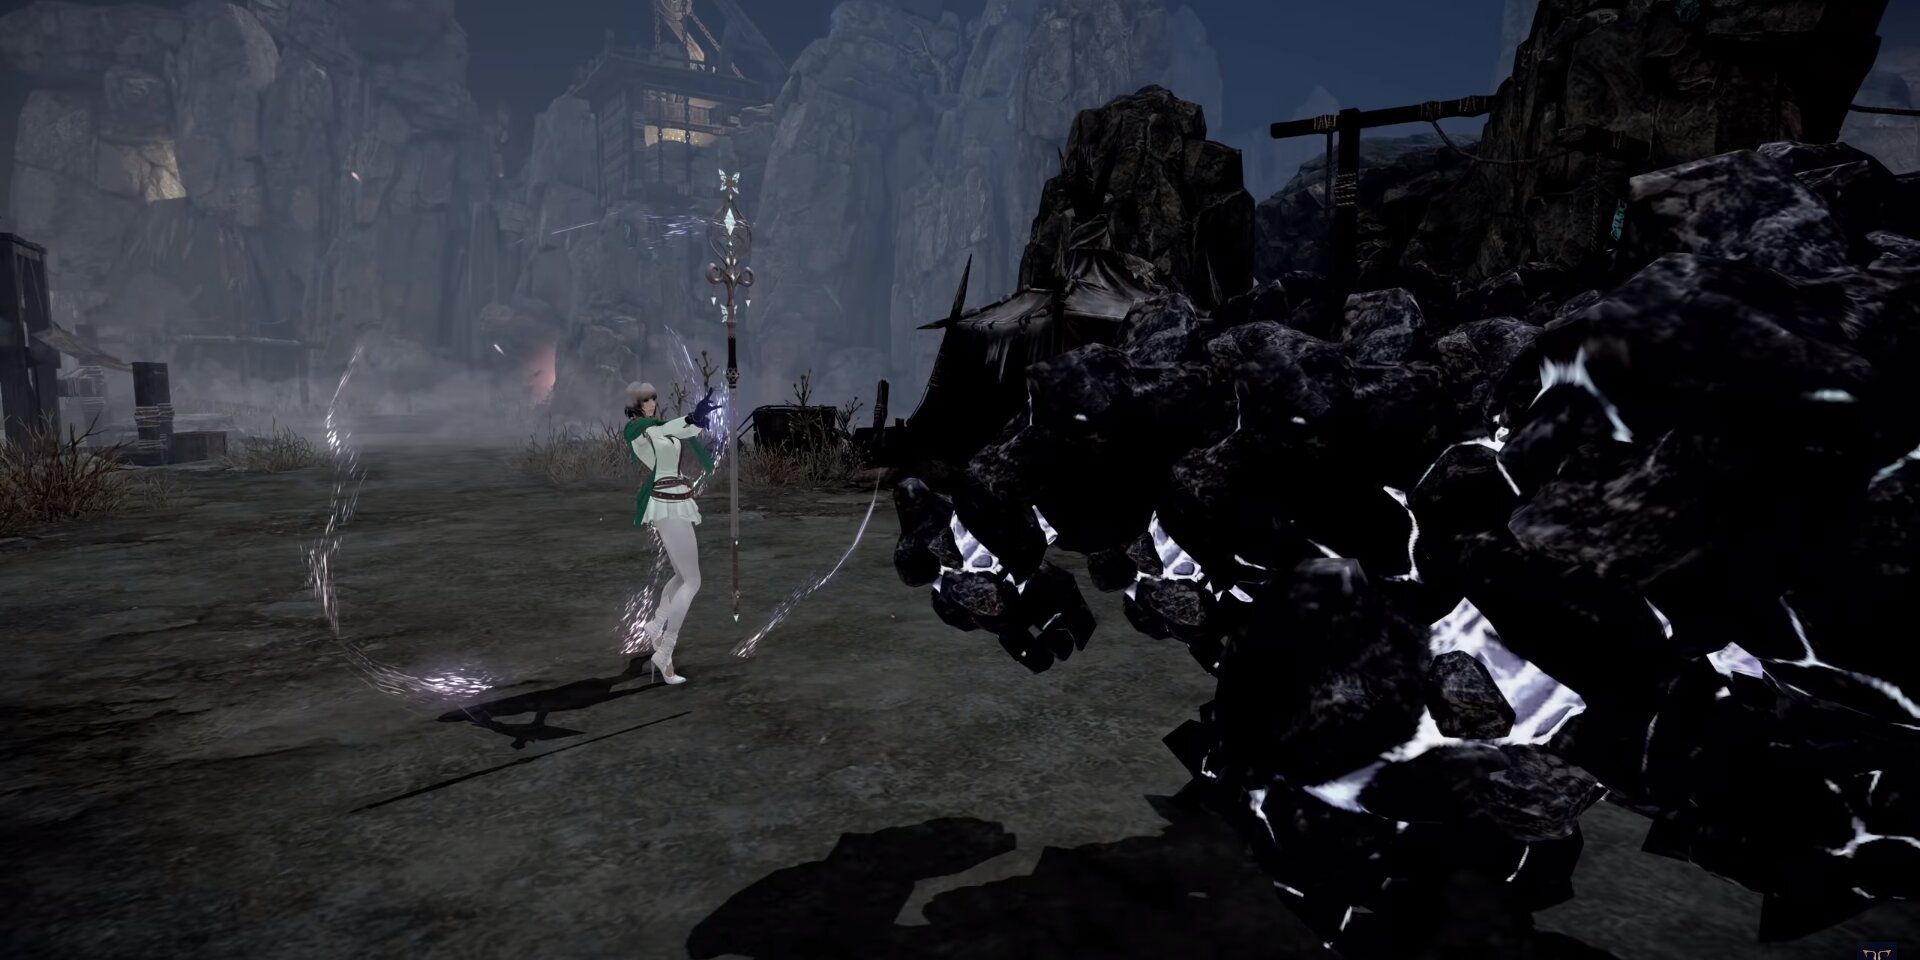 Image of gameplay from the Lost Ark Gameplay Trailer.